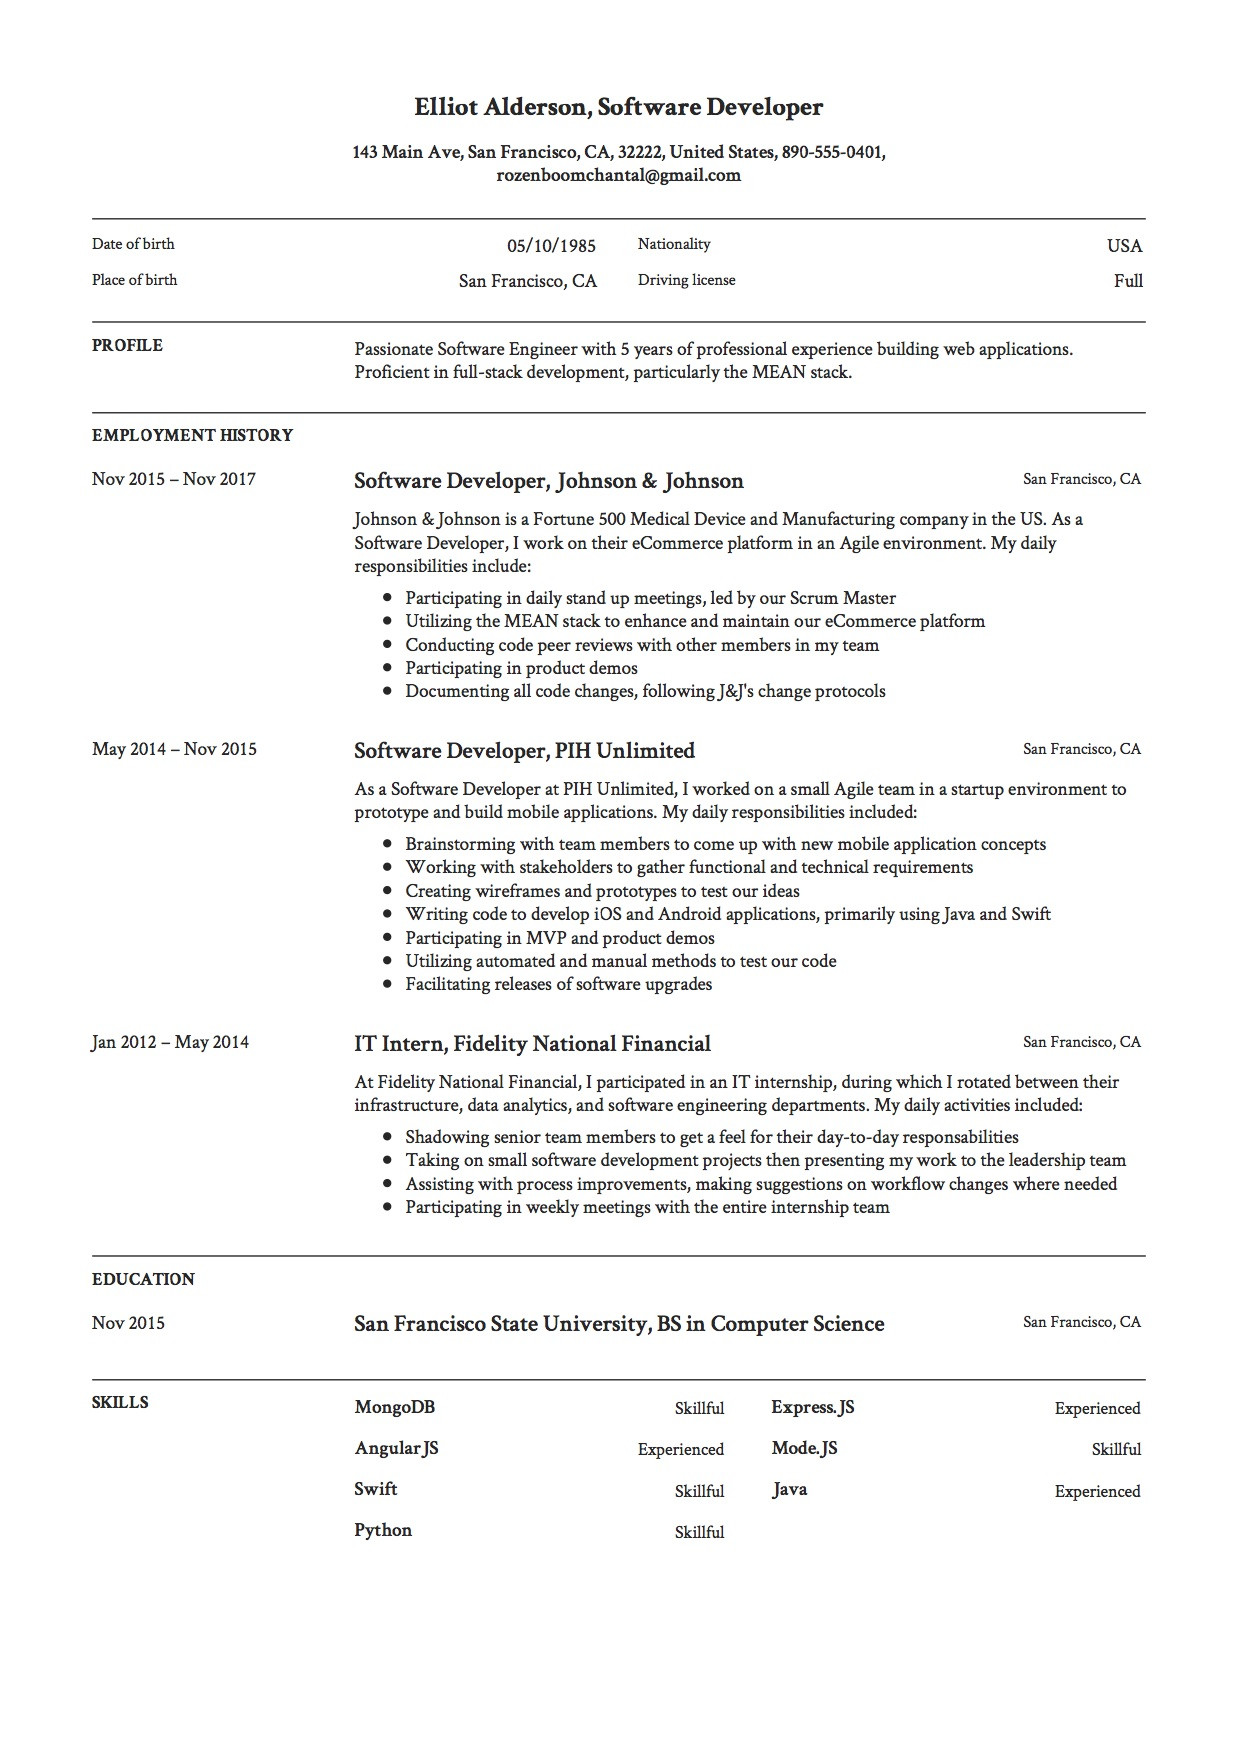 Sample Resume for Experienced software Developer Guide software Developer Resume [ 12 Samples]